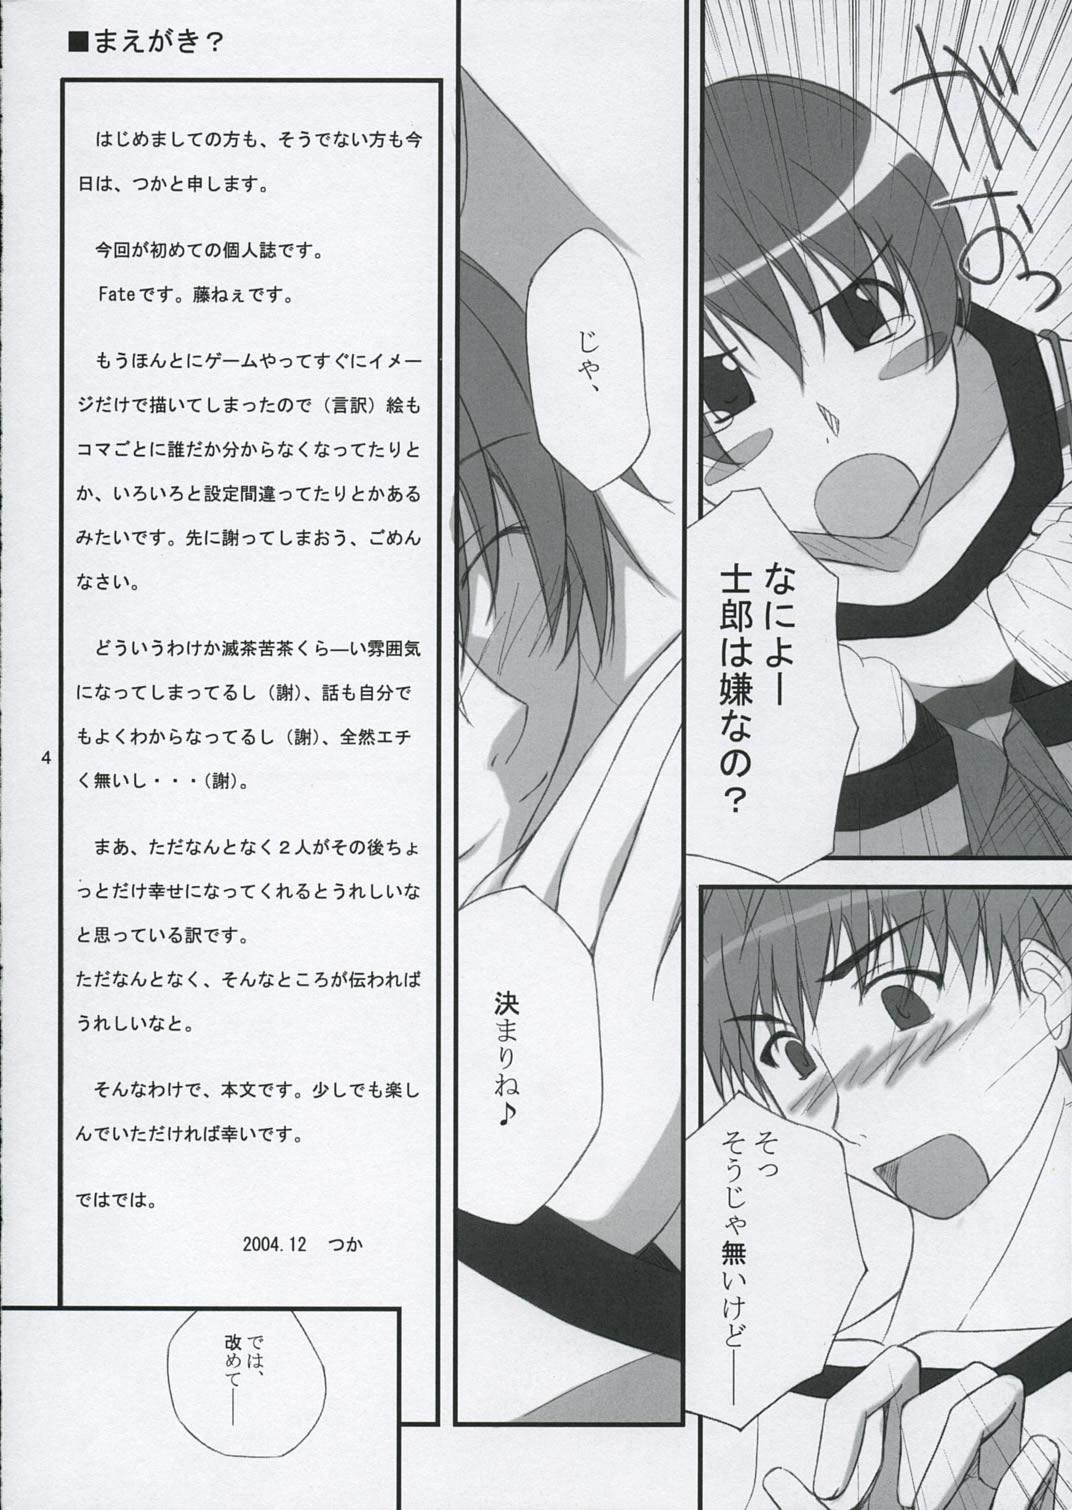 Interracial Hardcore The Place To Be? - Fate stay night Gay Bang - Page 3